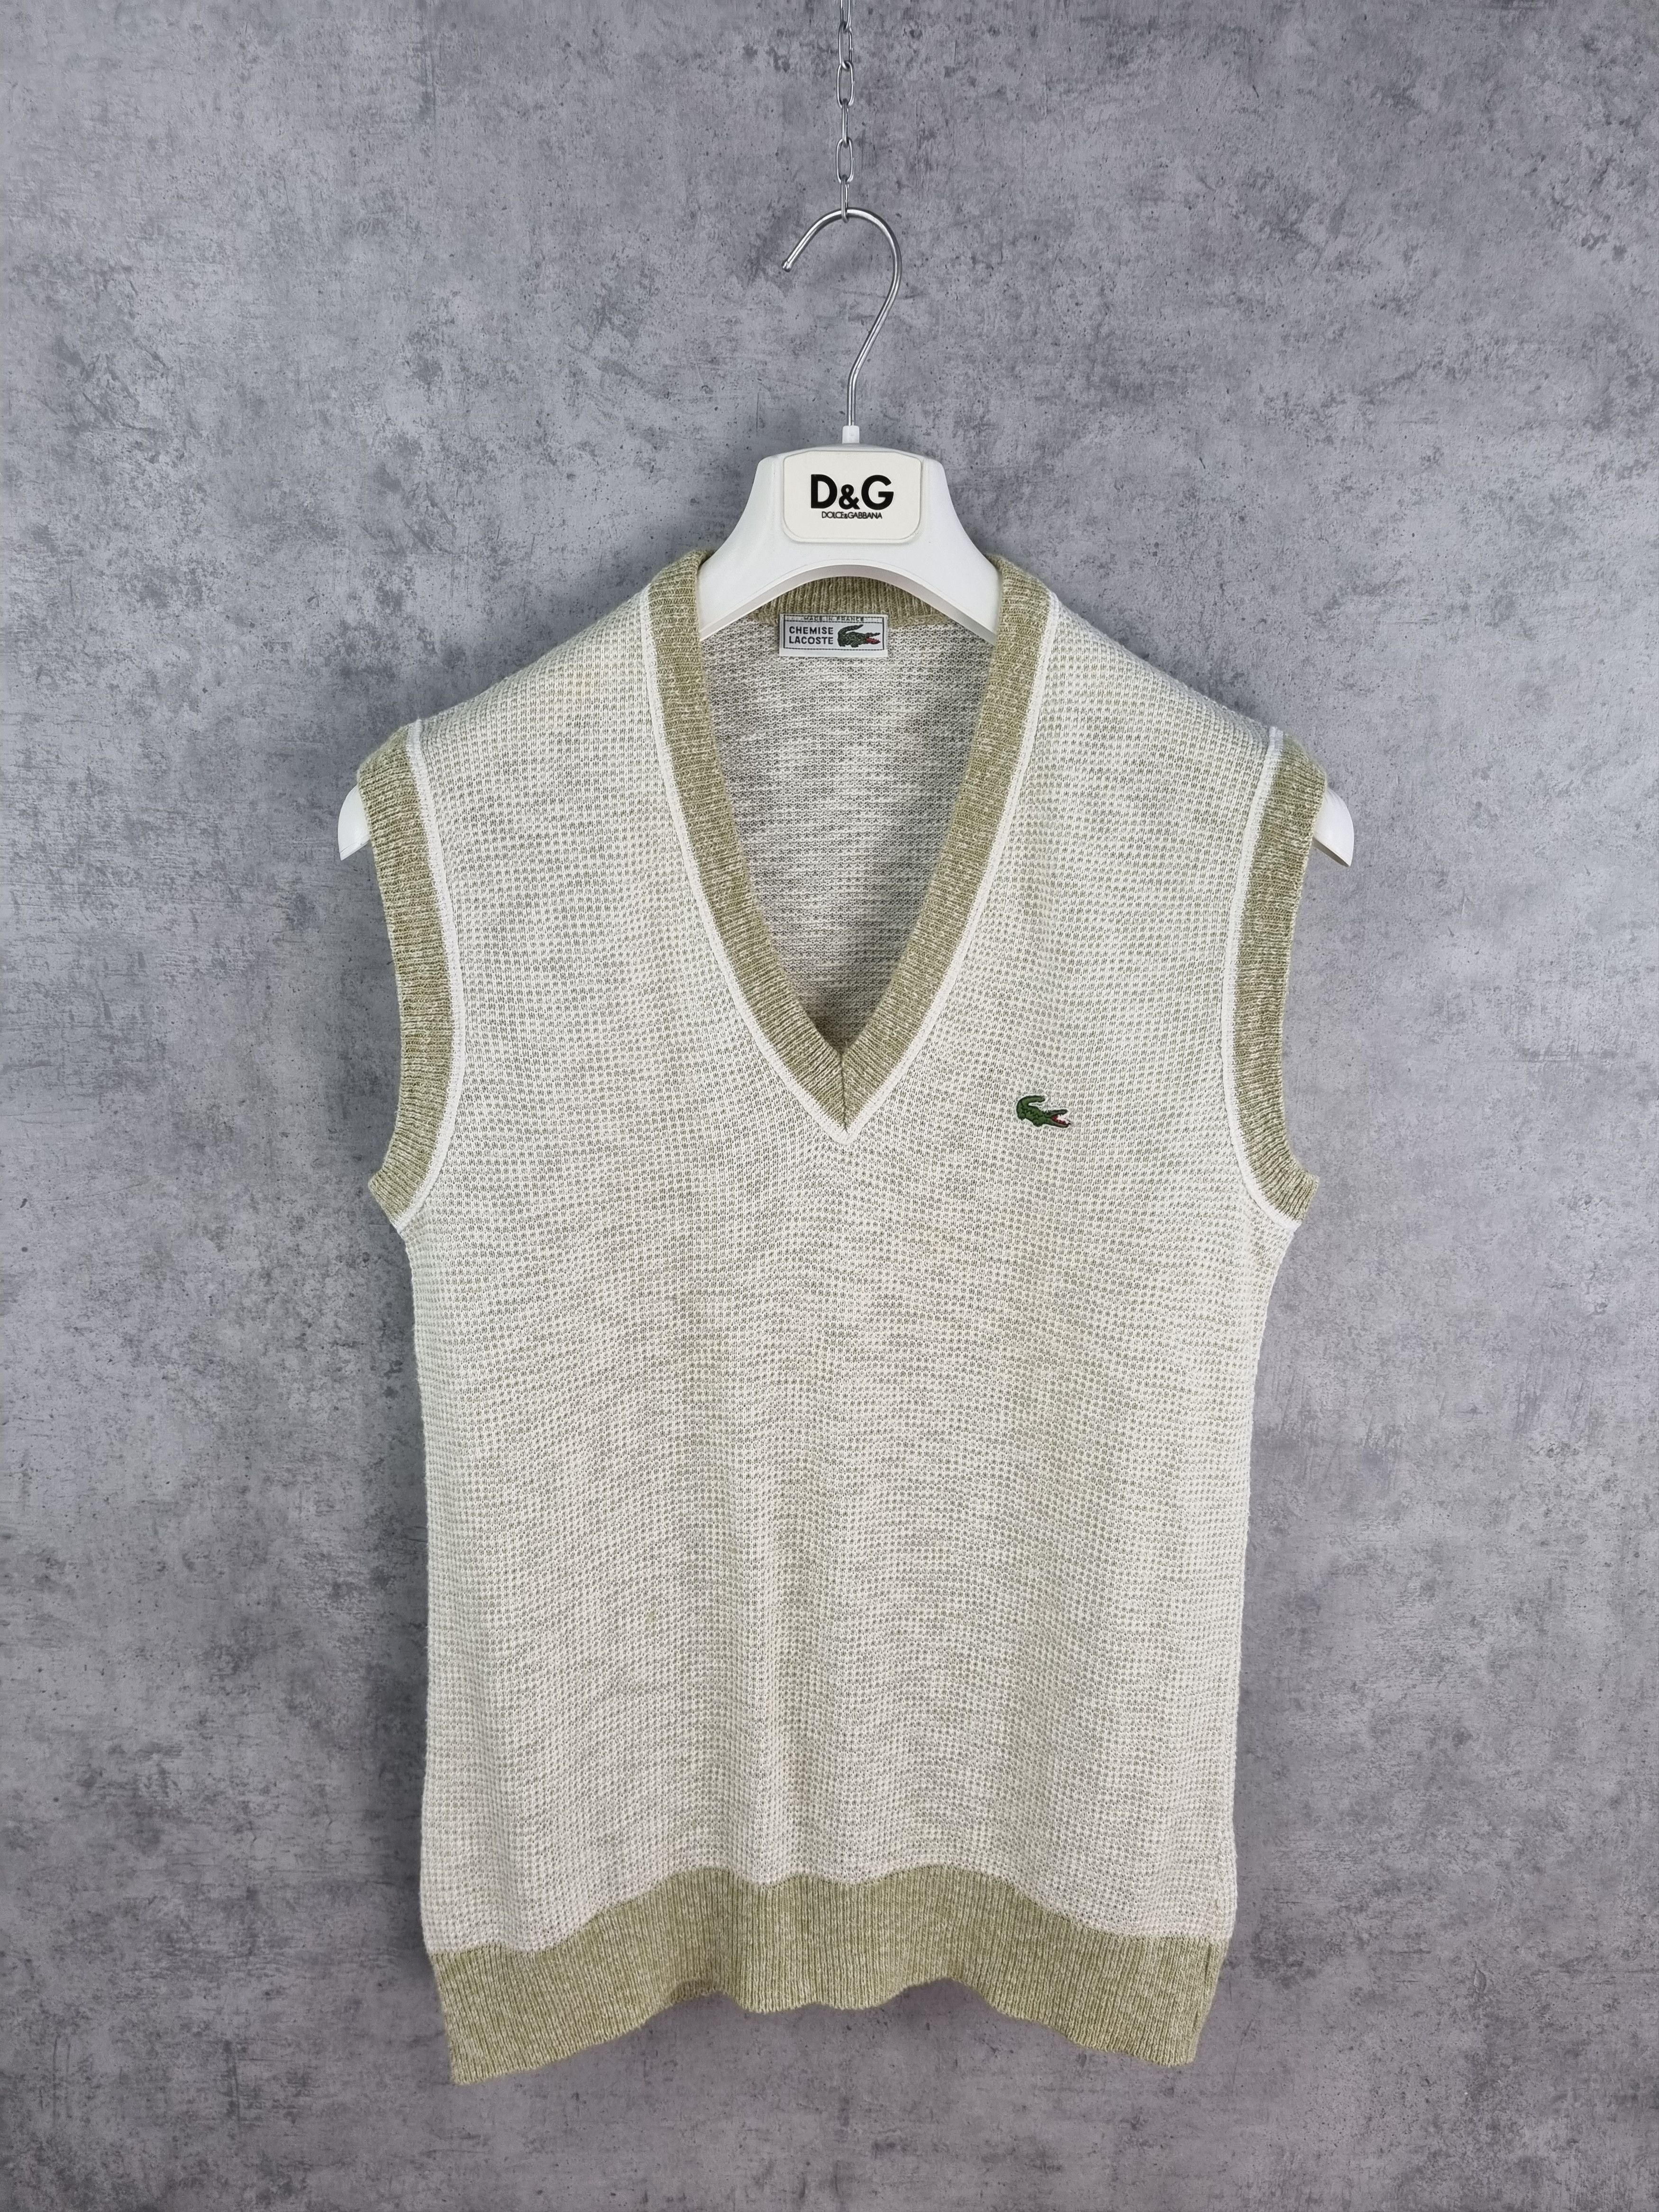 Pre-owned Golf Wang X Lacoste 80's Lacoste Chemise Knitwear Sleeveless Sweater/vest In Dirty White